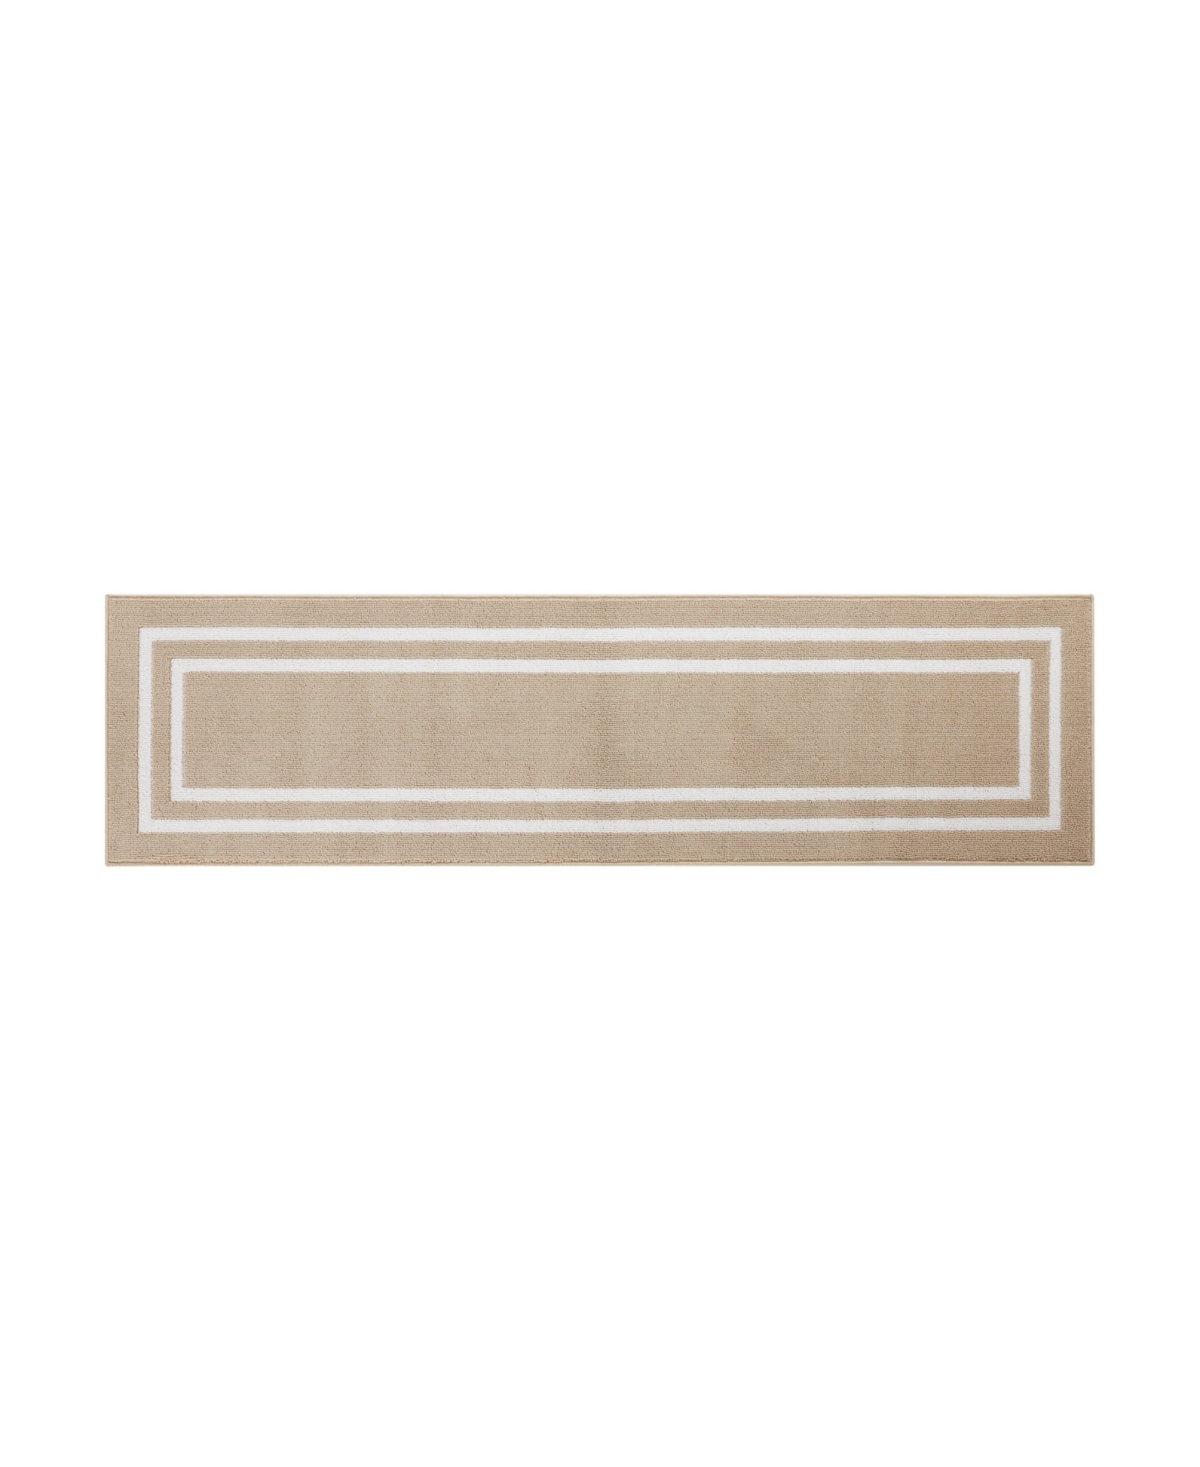 Jean Pierre Double Line Border Tufted In Beige And White